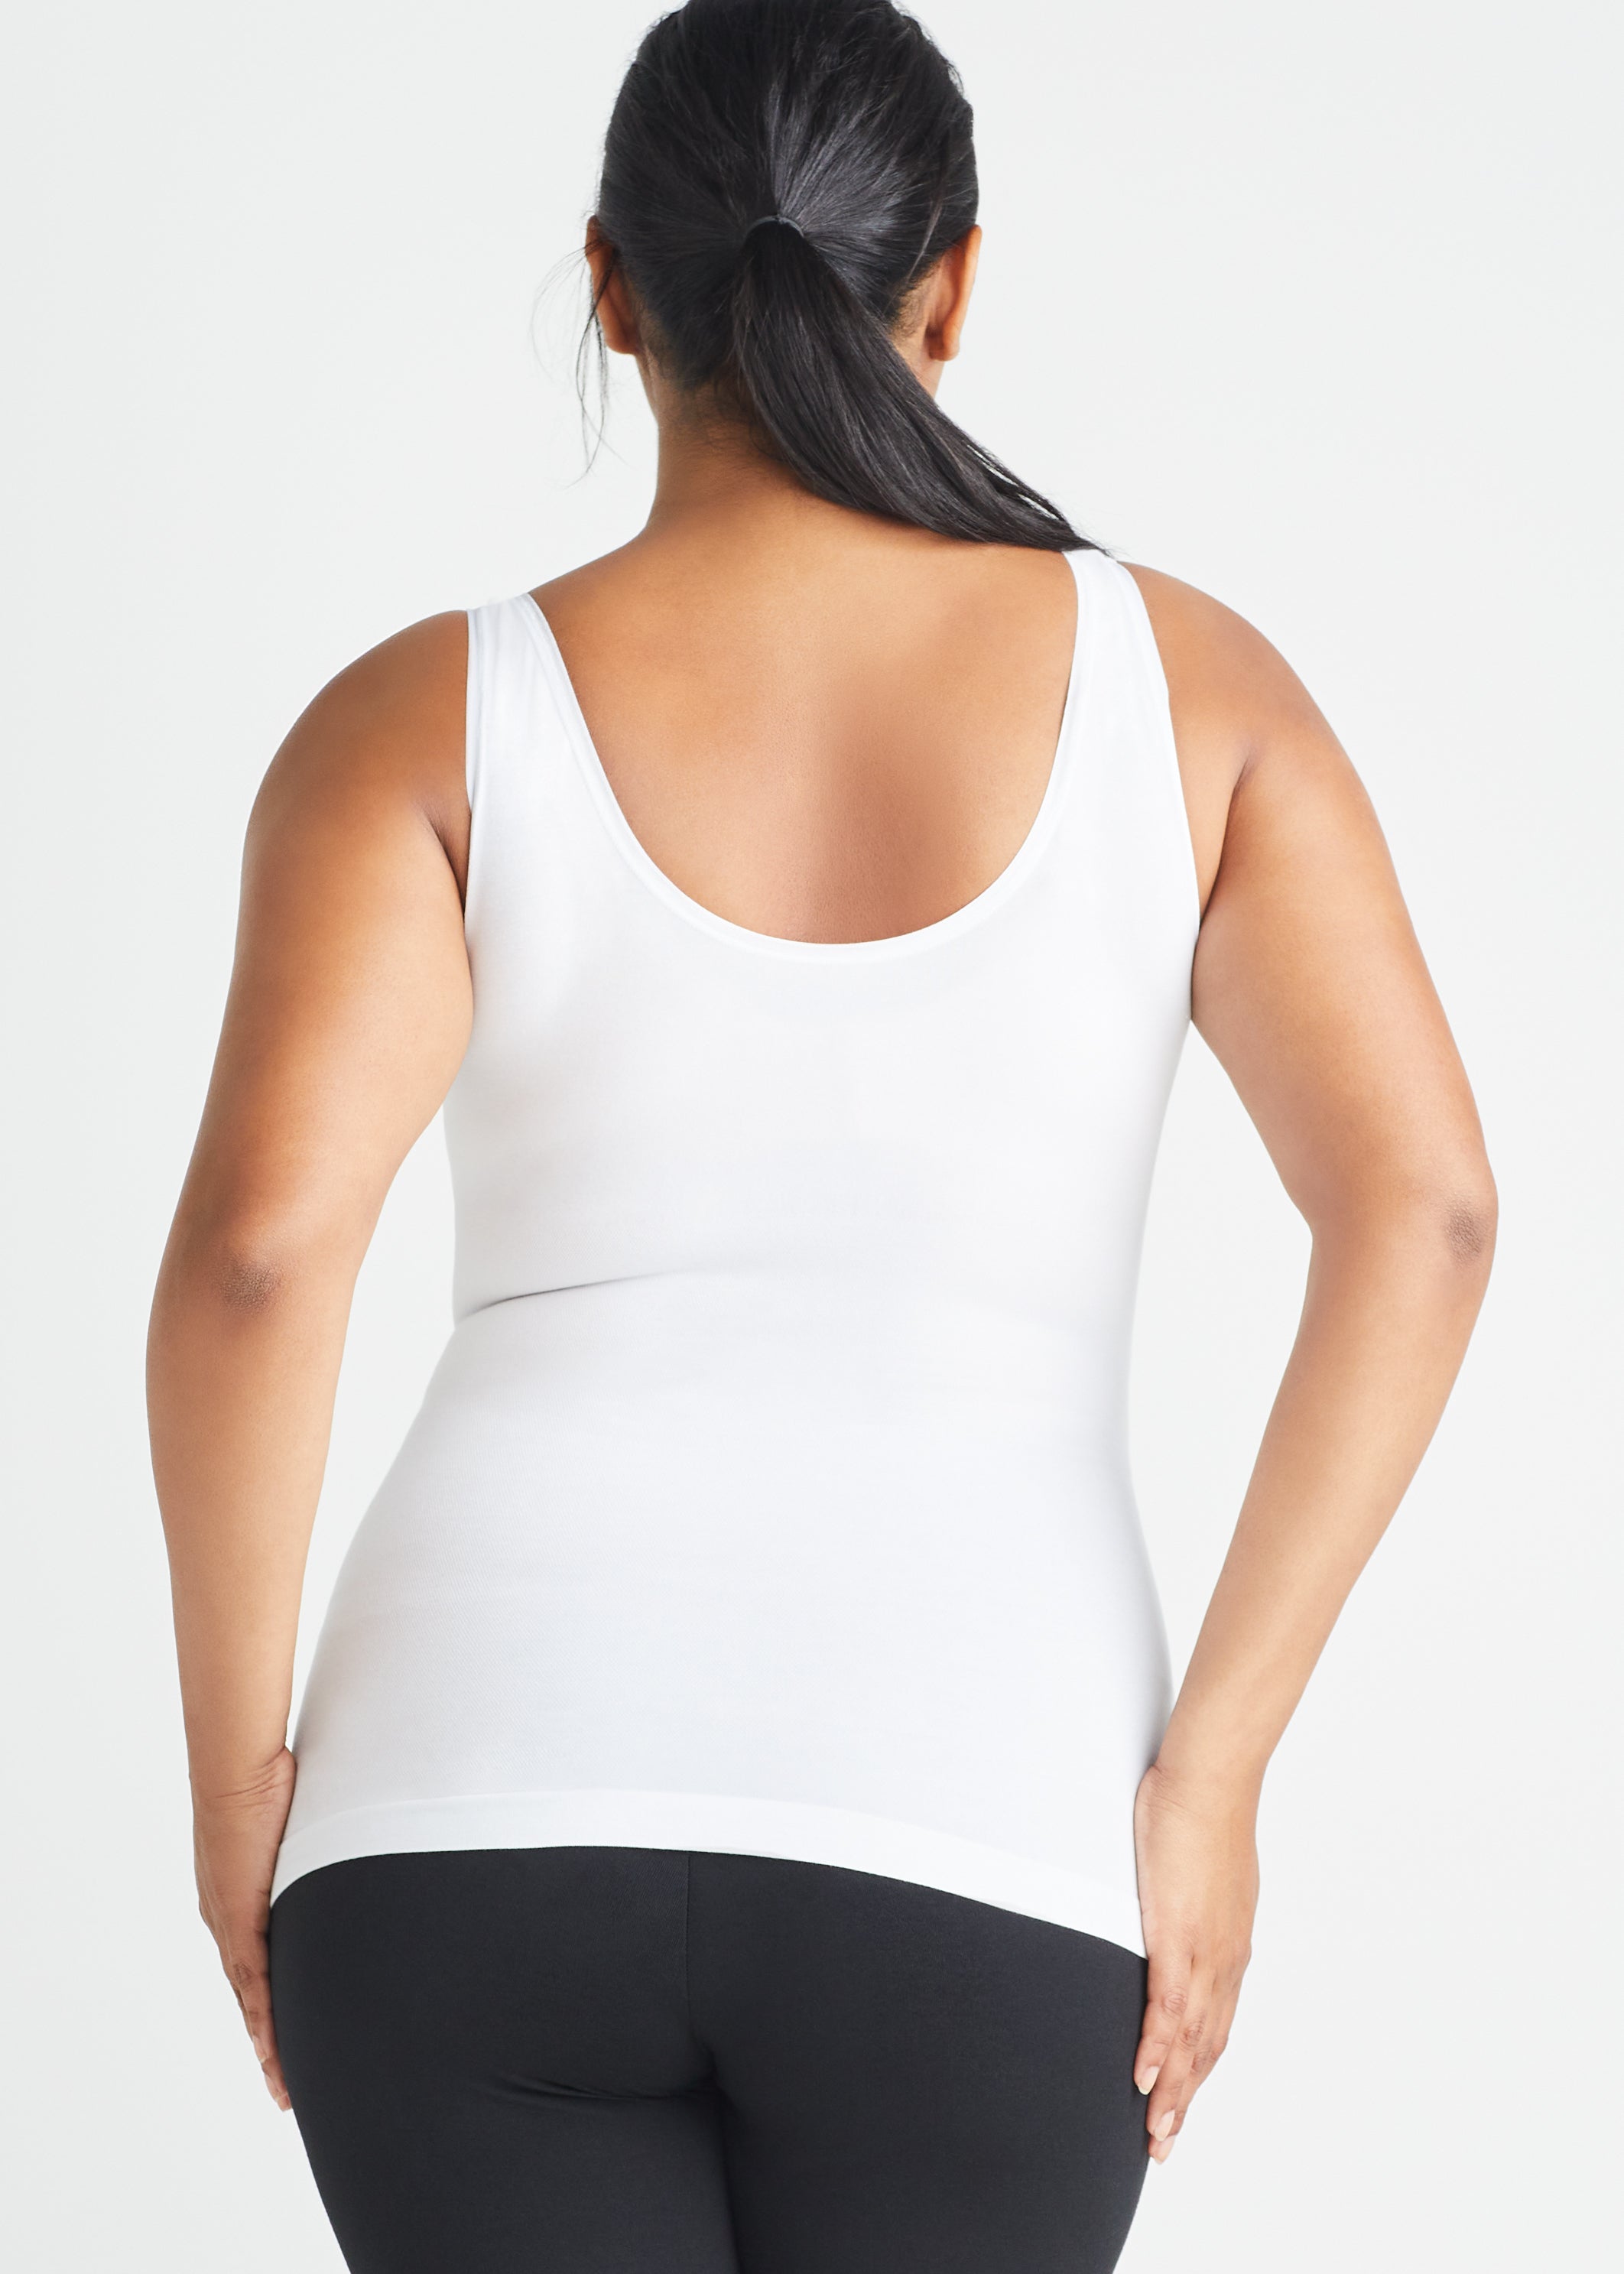 Yummie womens 6-in-1 Shaping Tank Shapewear Top, White, Large US at   Women's Clothing store